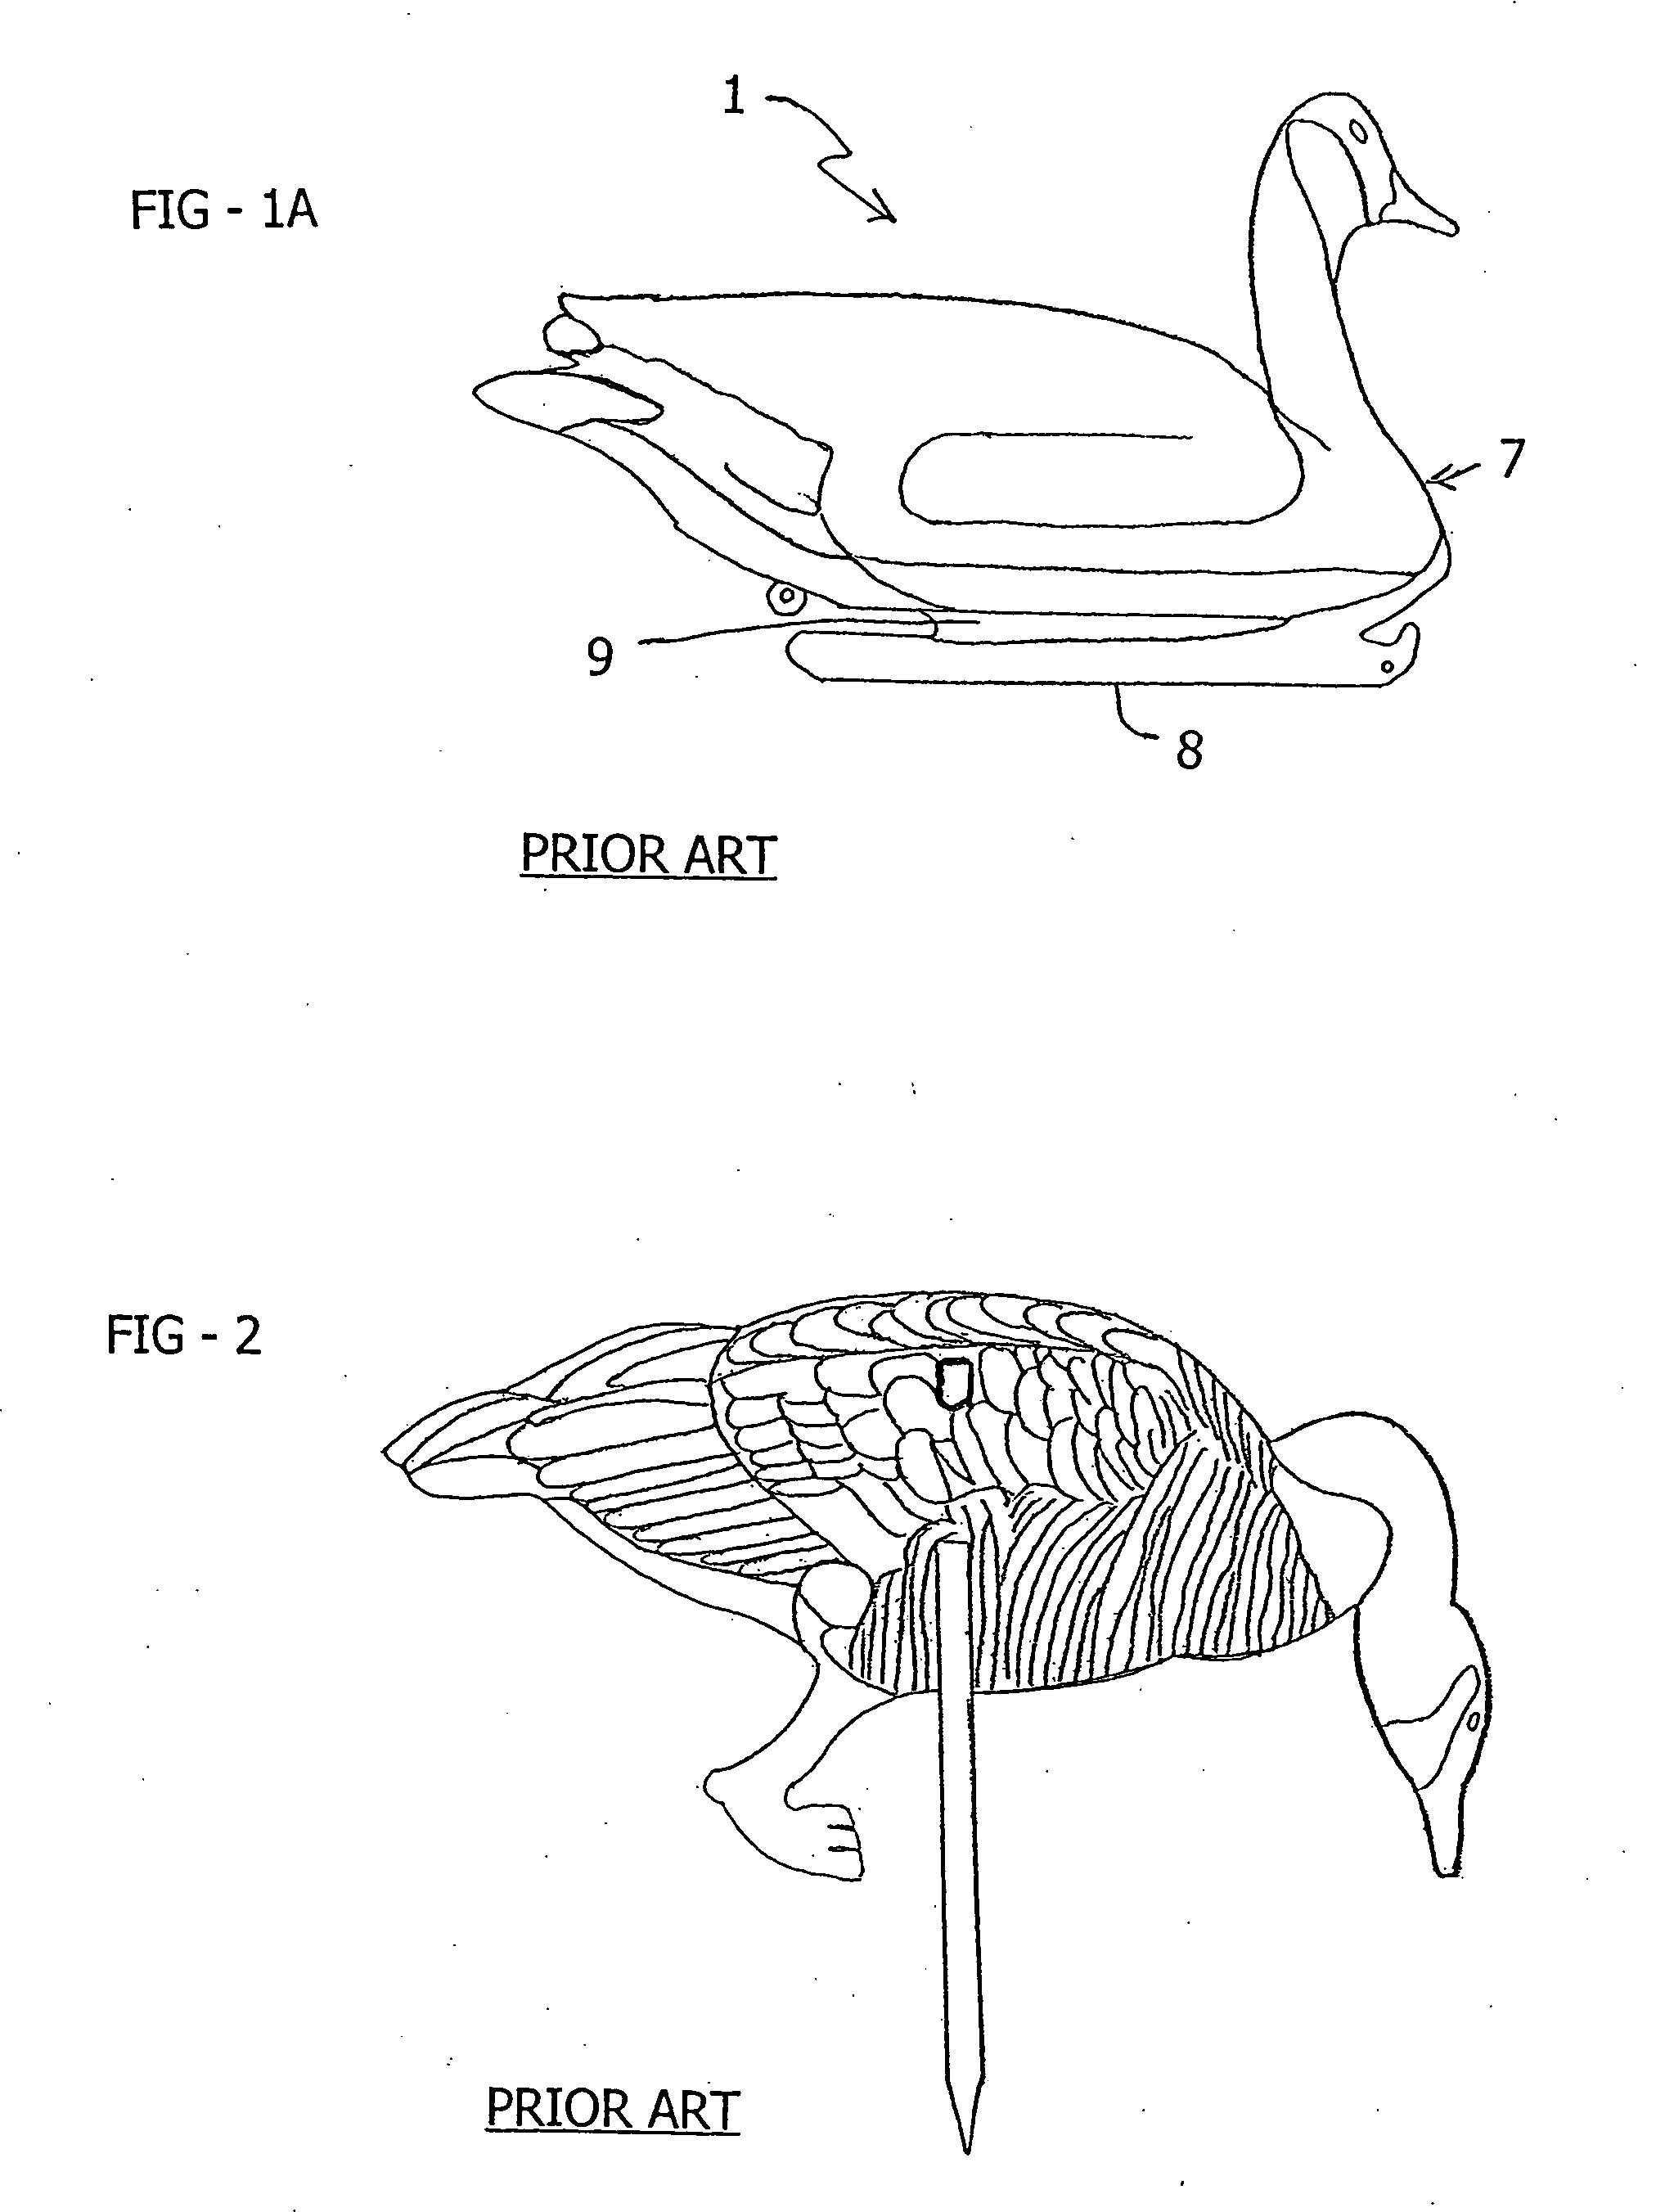 Adapter stand for use with a buoyant waterfowl decoy, kit including the adapter stand, and method of using same